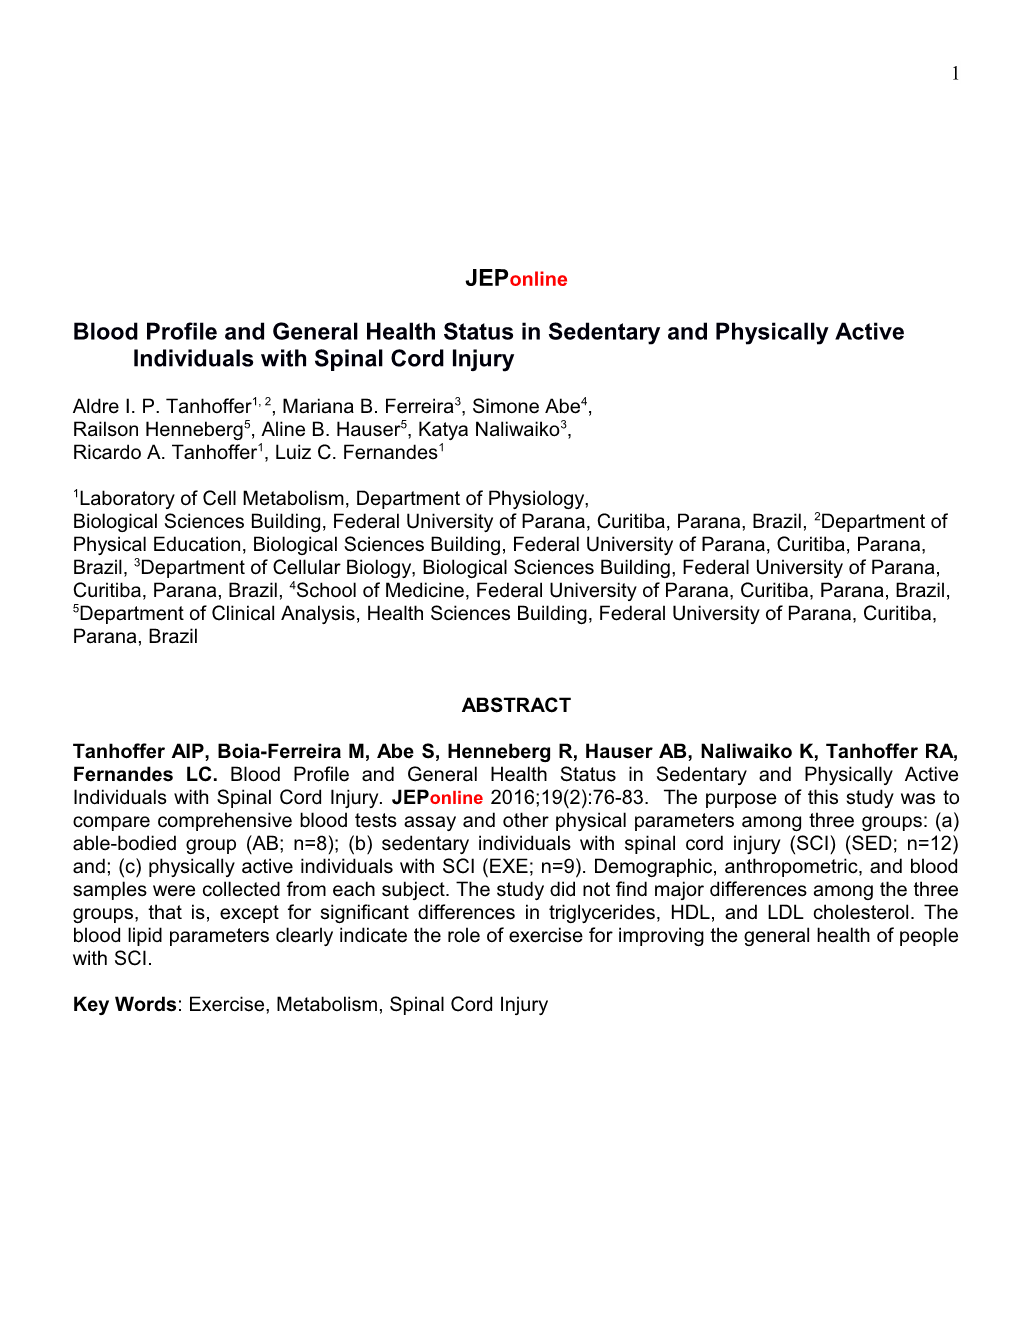 Blood Profile and General Health Status in Sedentary and Physically Active Individuals